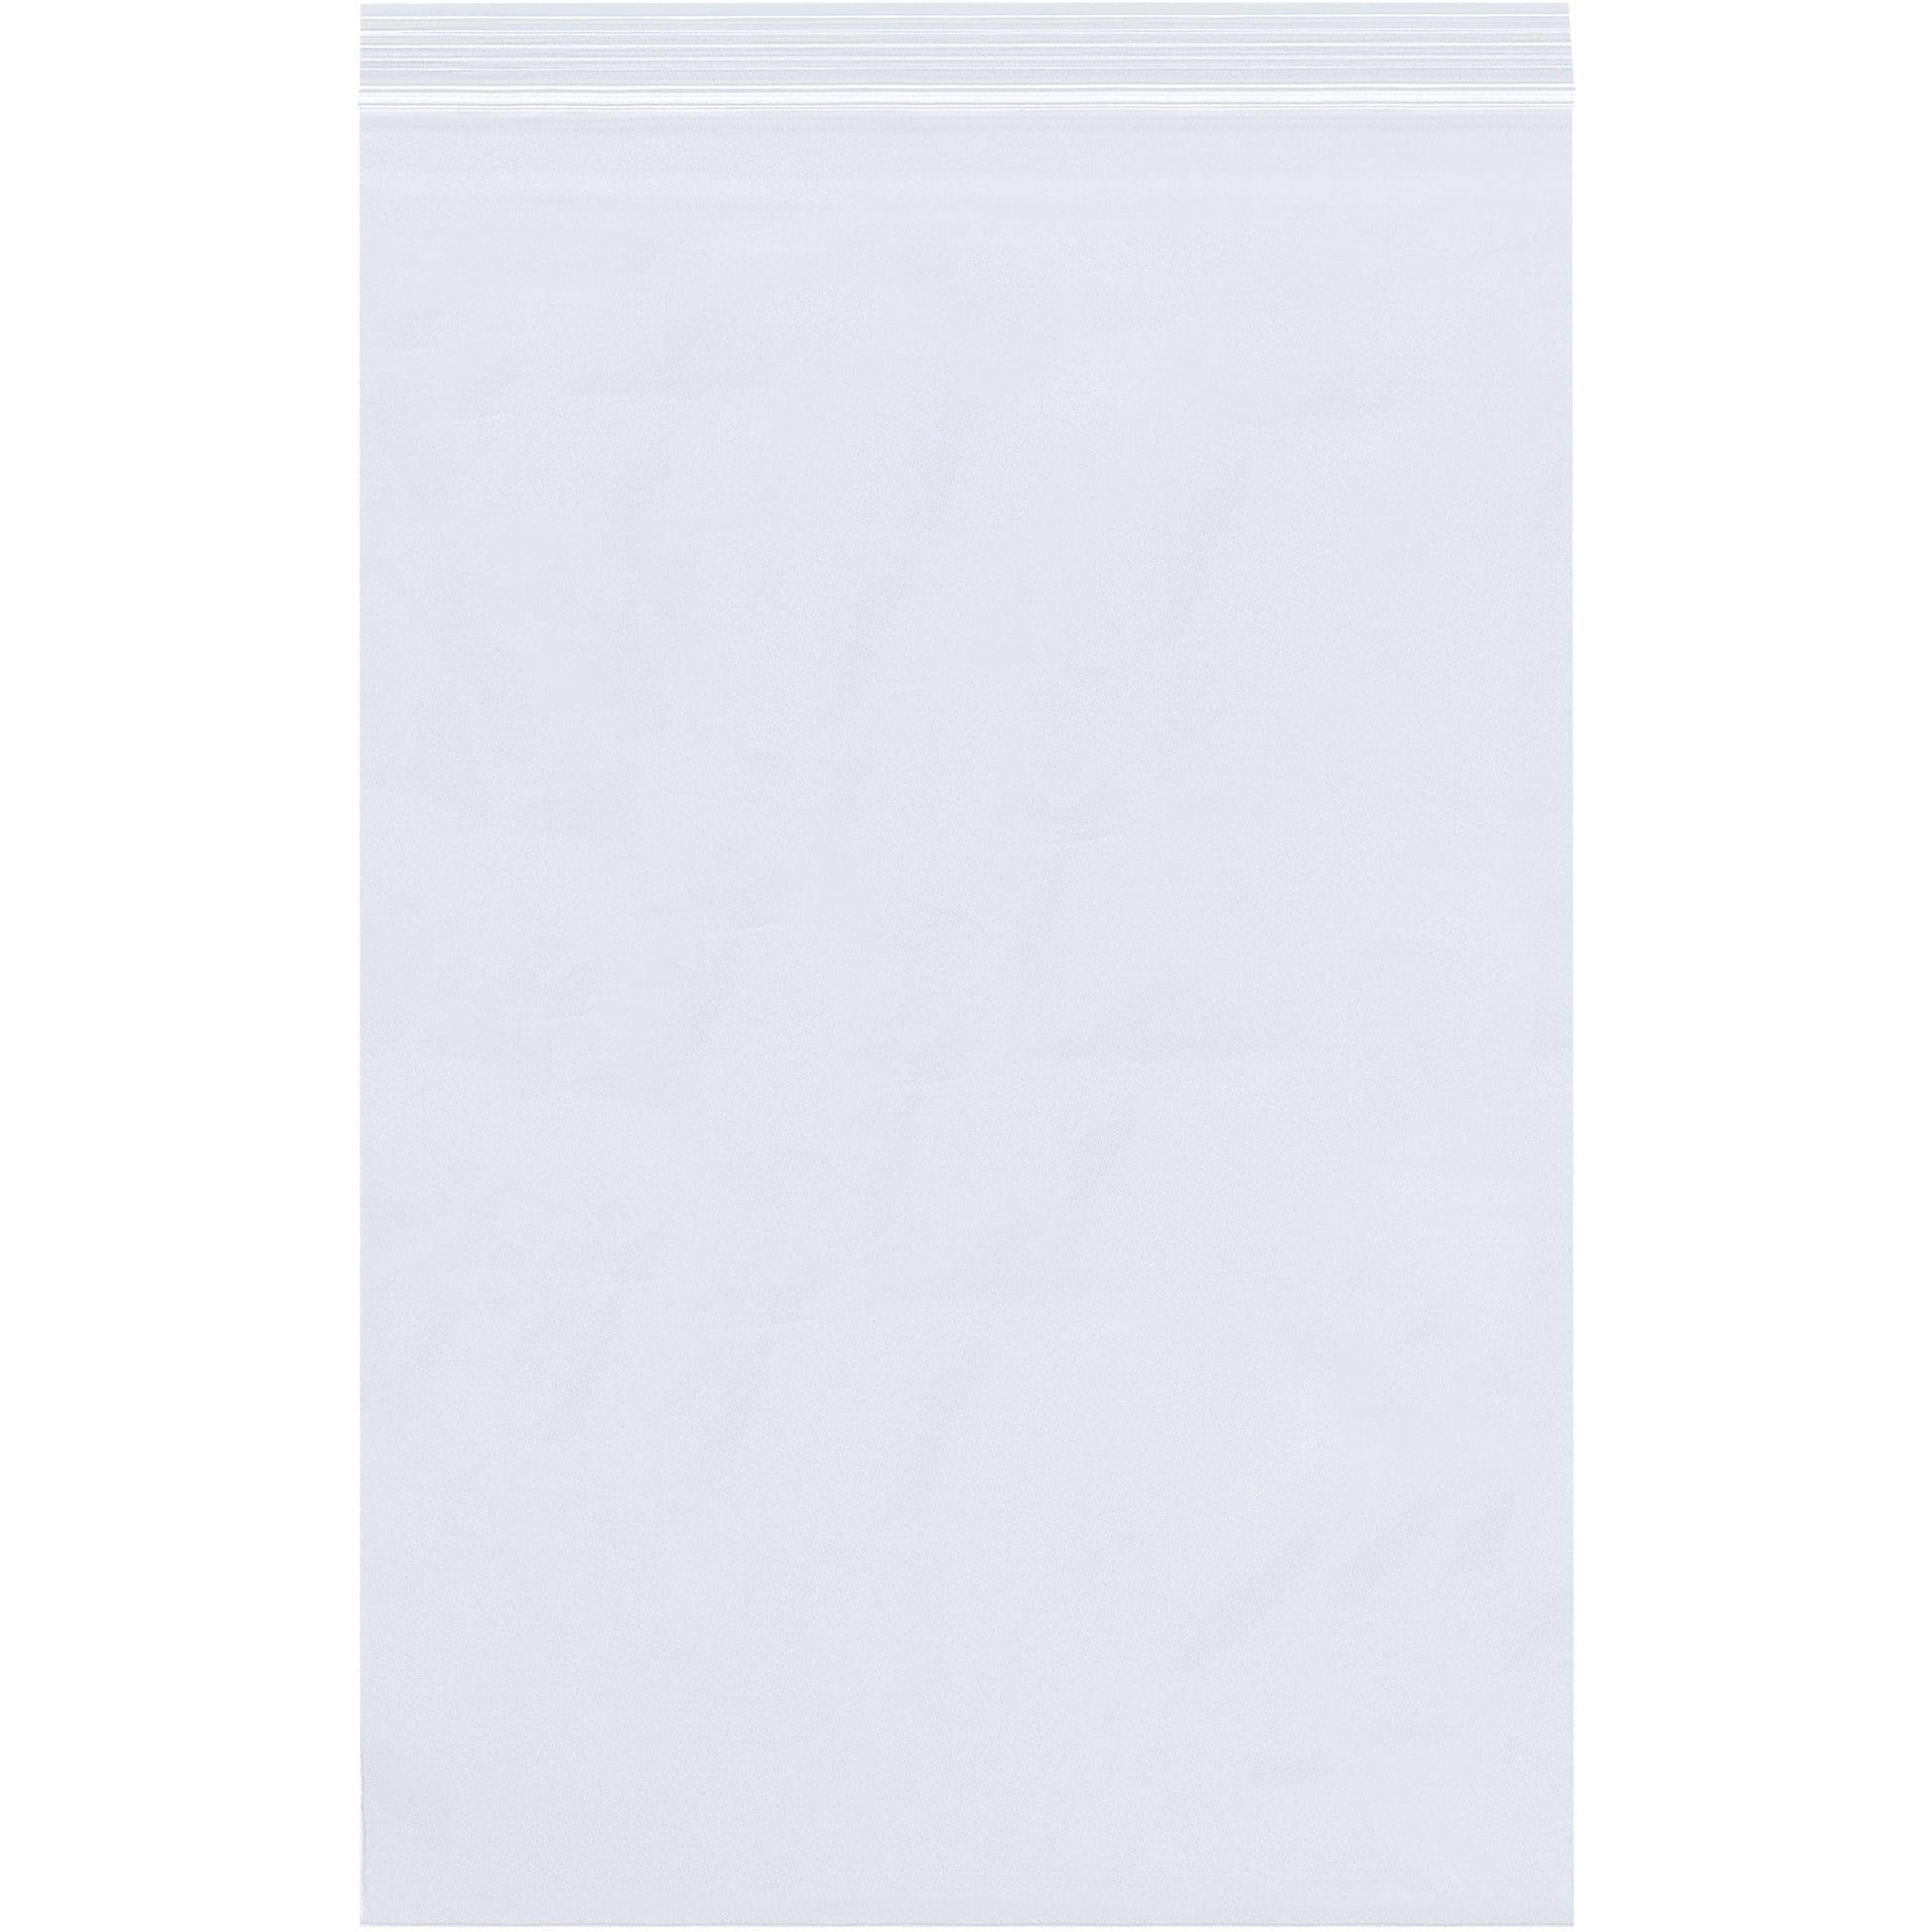 3 x 6" - 6 Mil Reclosable Poly Bags - PB3856